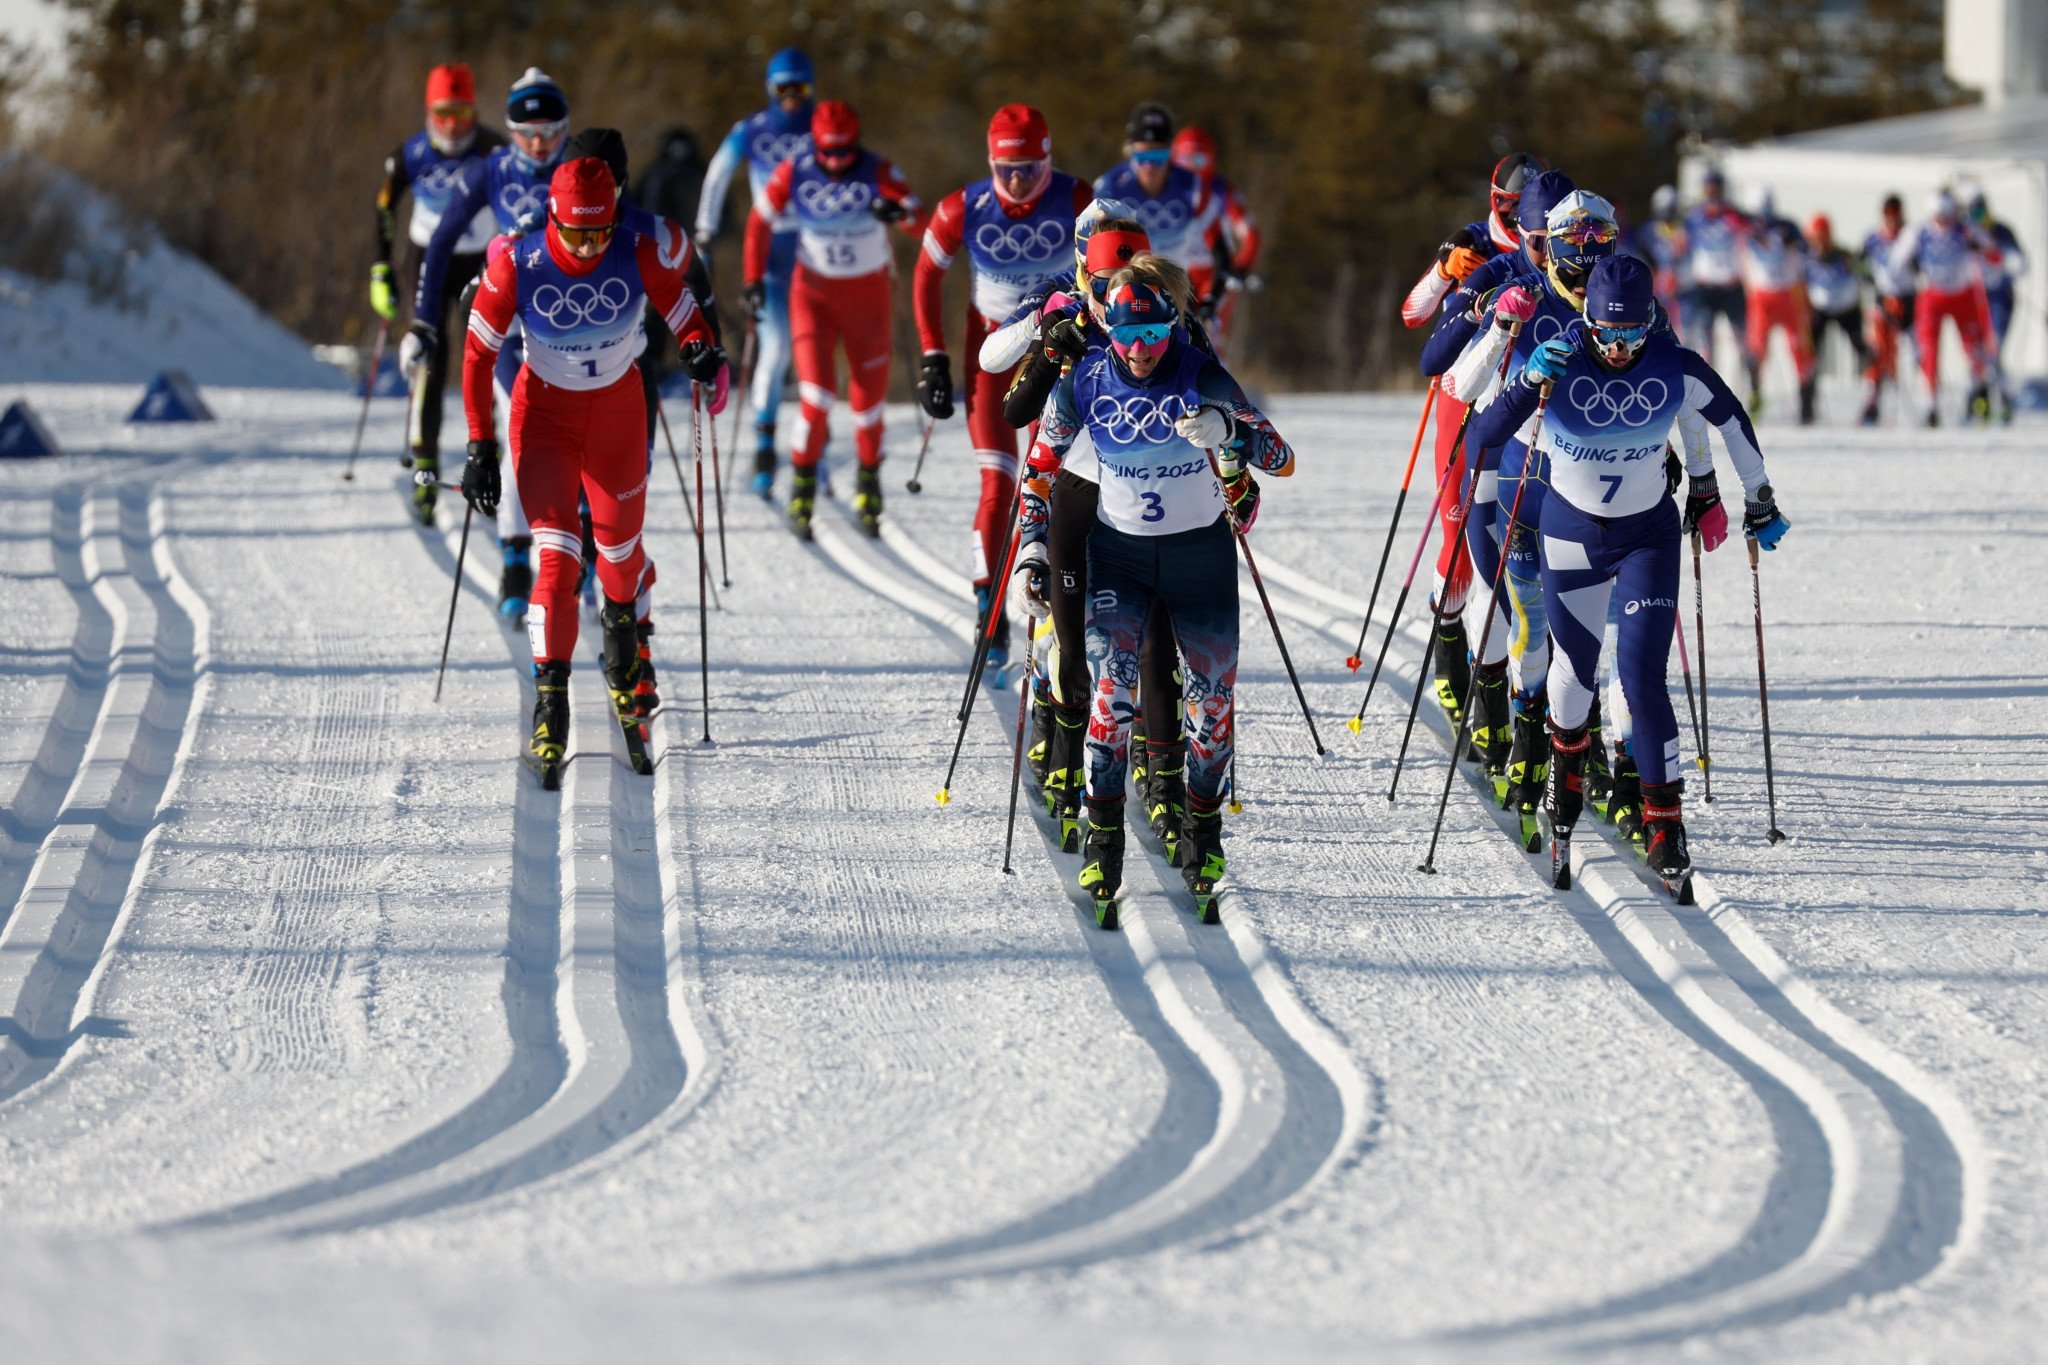 Women will race across the same distance as men in the cross-country skiing competition at Milan Cortina 2026 ©Getty Images